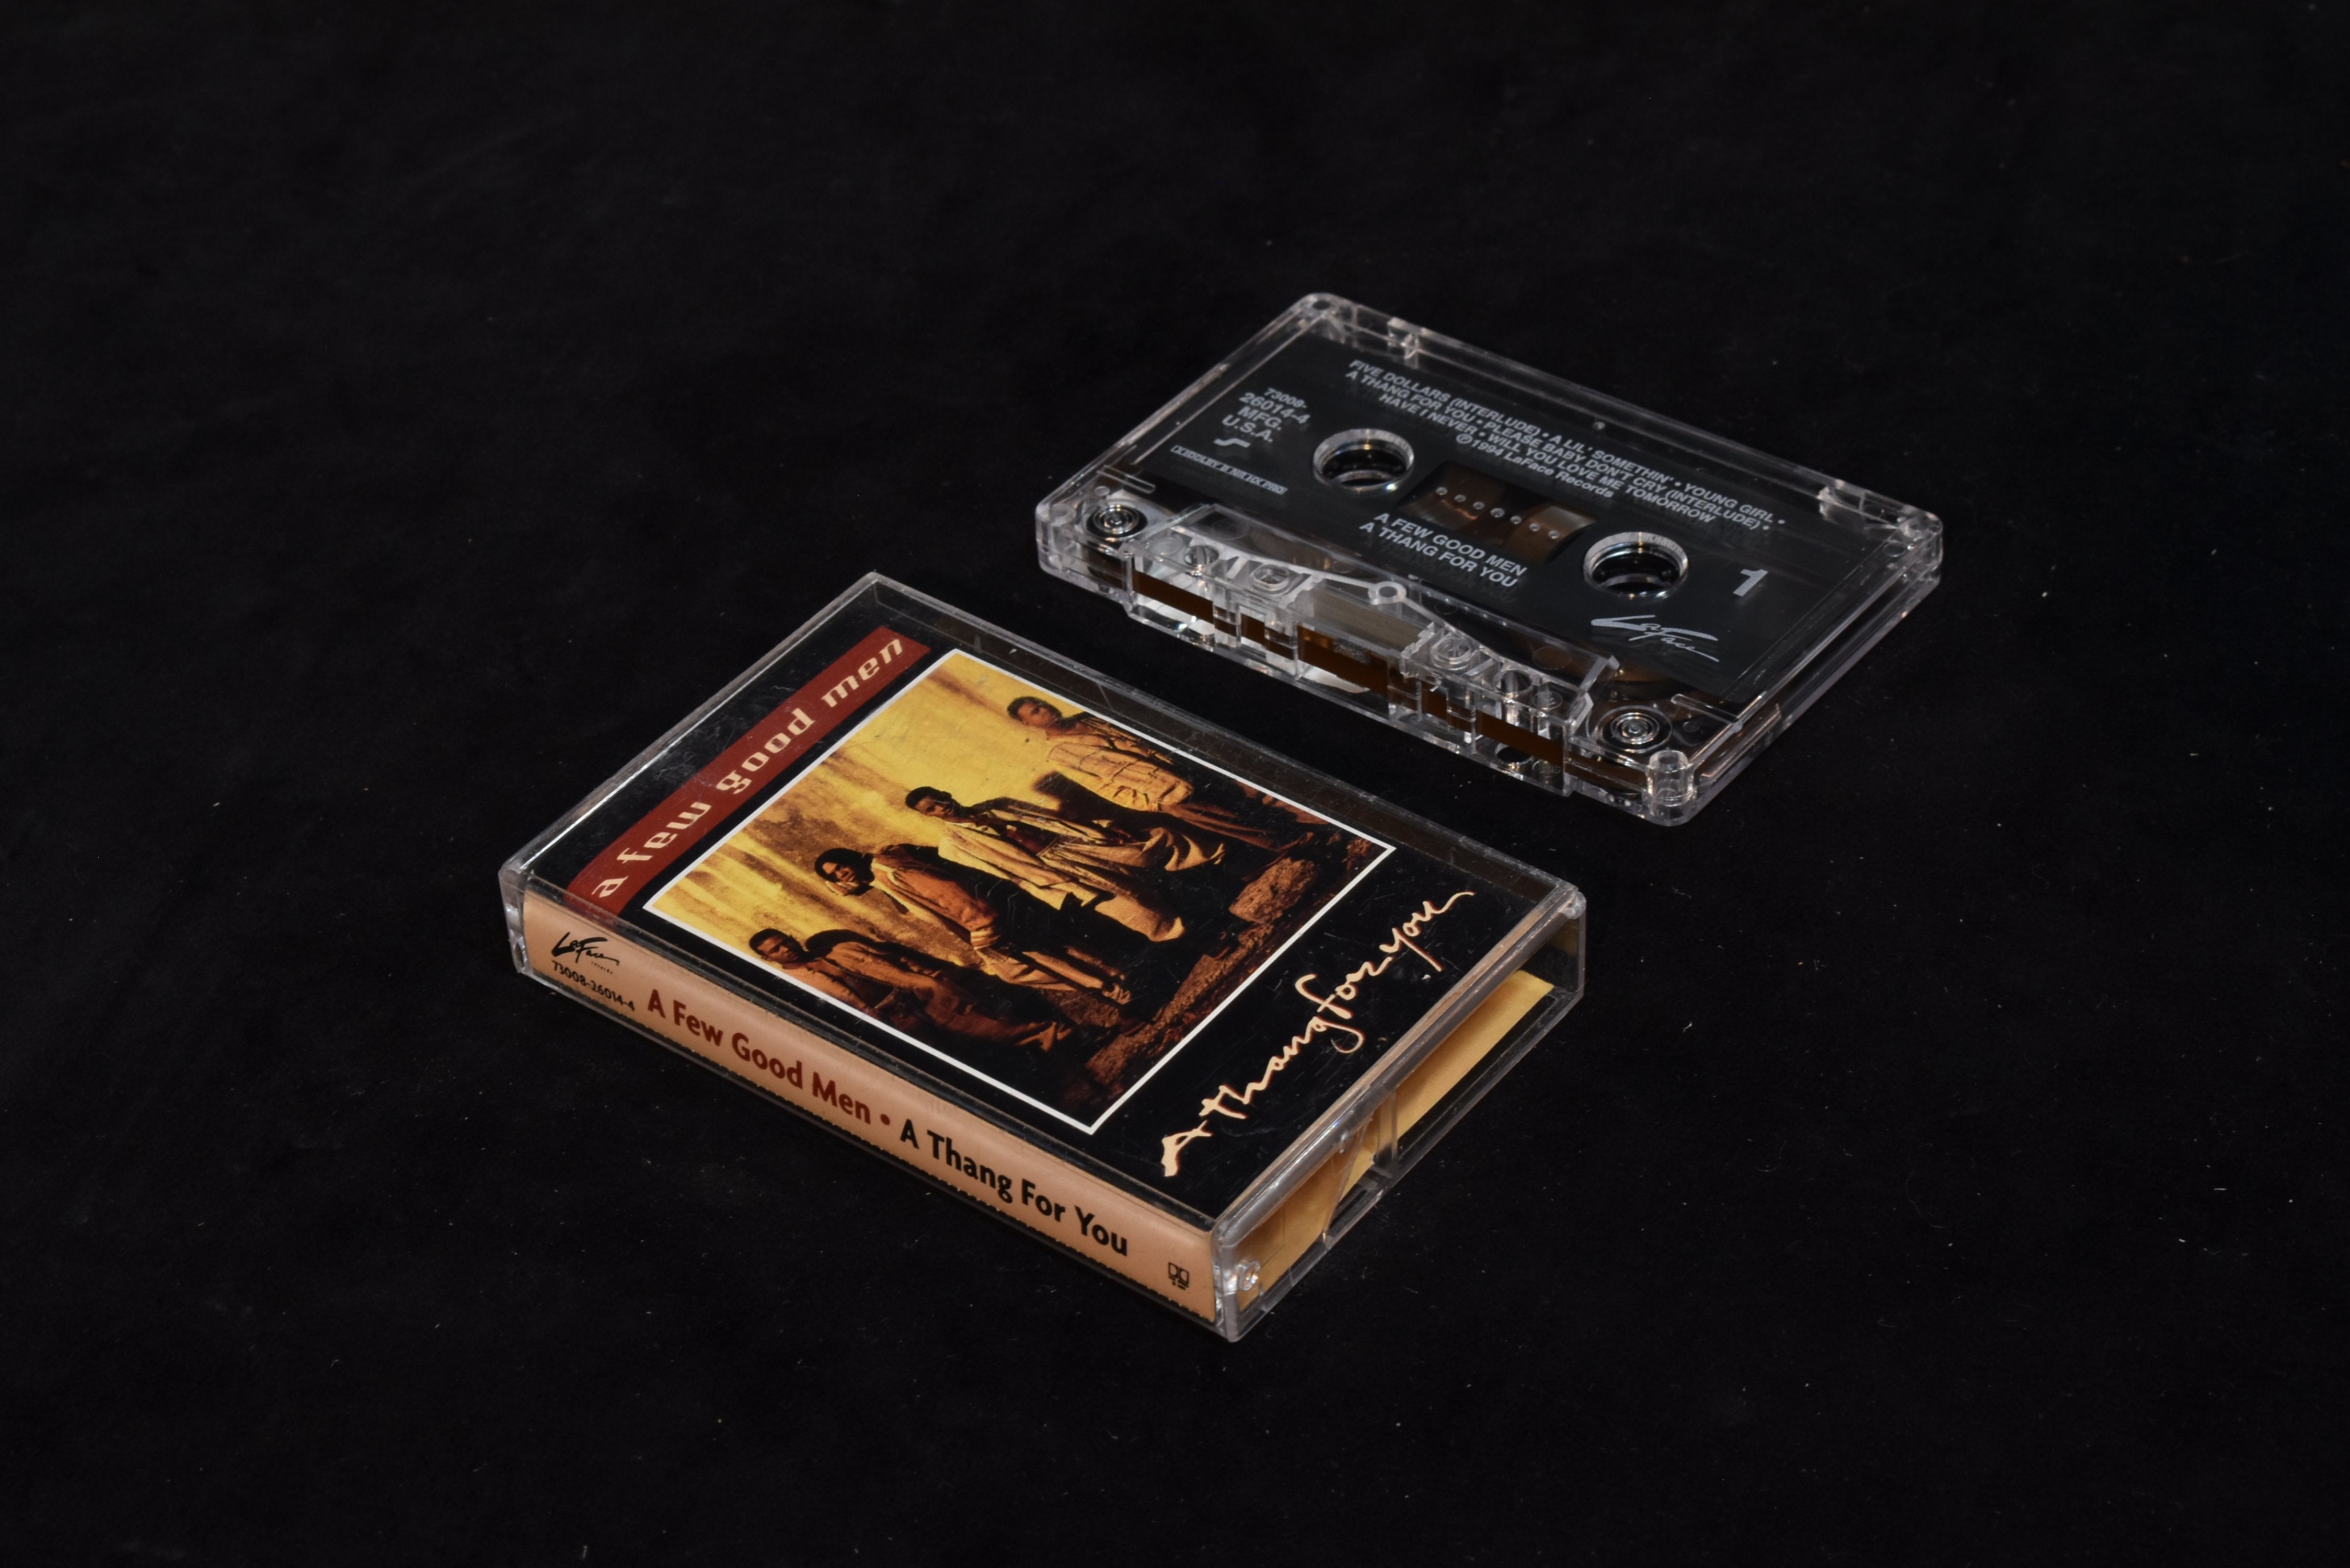 A few good men a thang for you cassette tape used